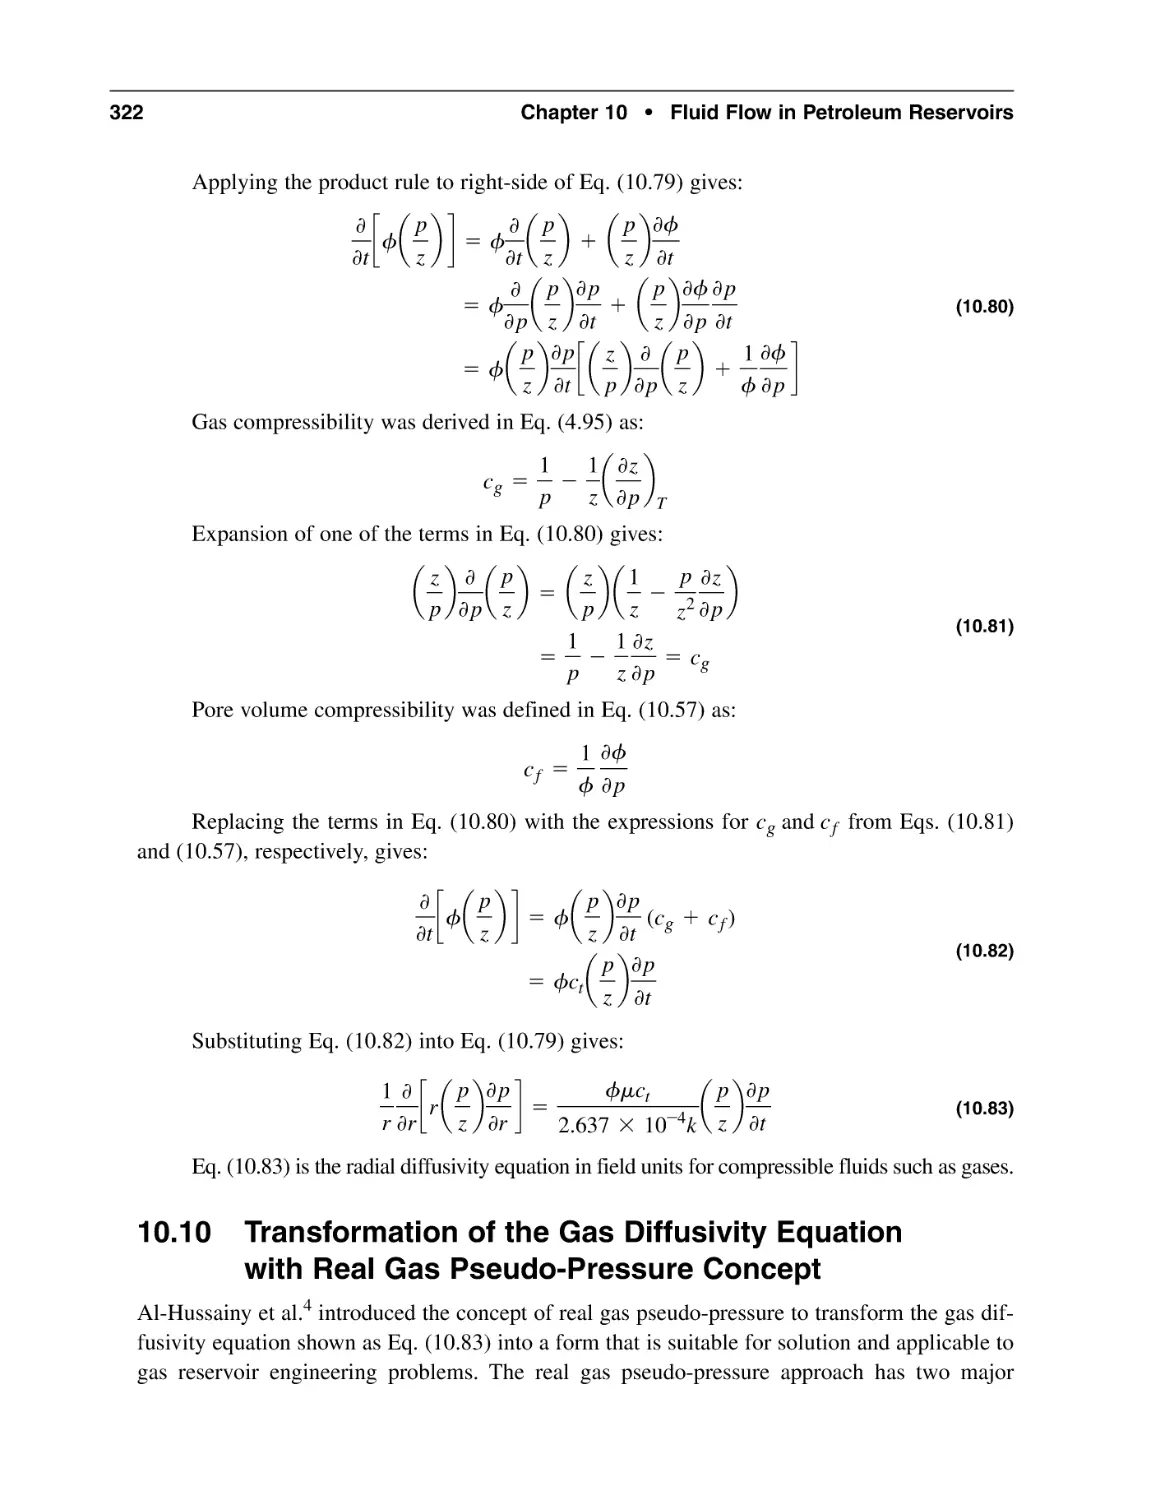 10.10 Transformation of the Gas Diffusivity Equation with Real Gas Pseudo-Pressure Concept